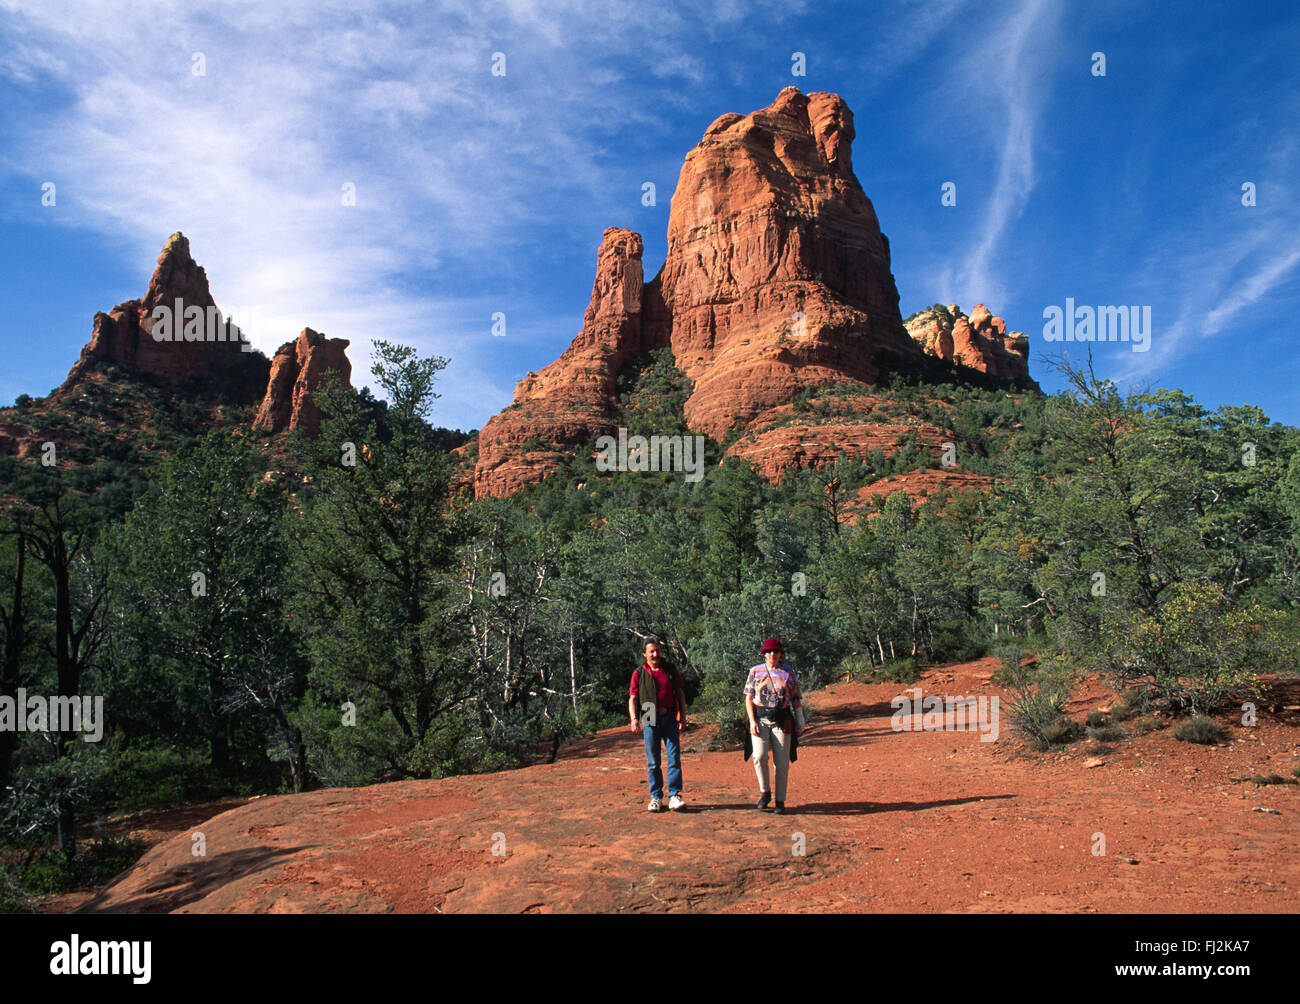 The TEA CUP ROCK FORMATION in RED ROCK COUNTRY'S SECRET CANYON (trail 121) - SEDONA, ARIZONA Stock Photo